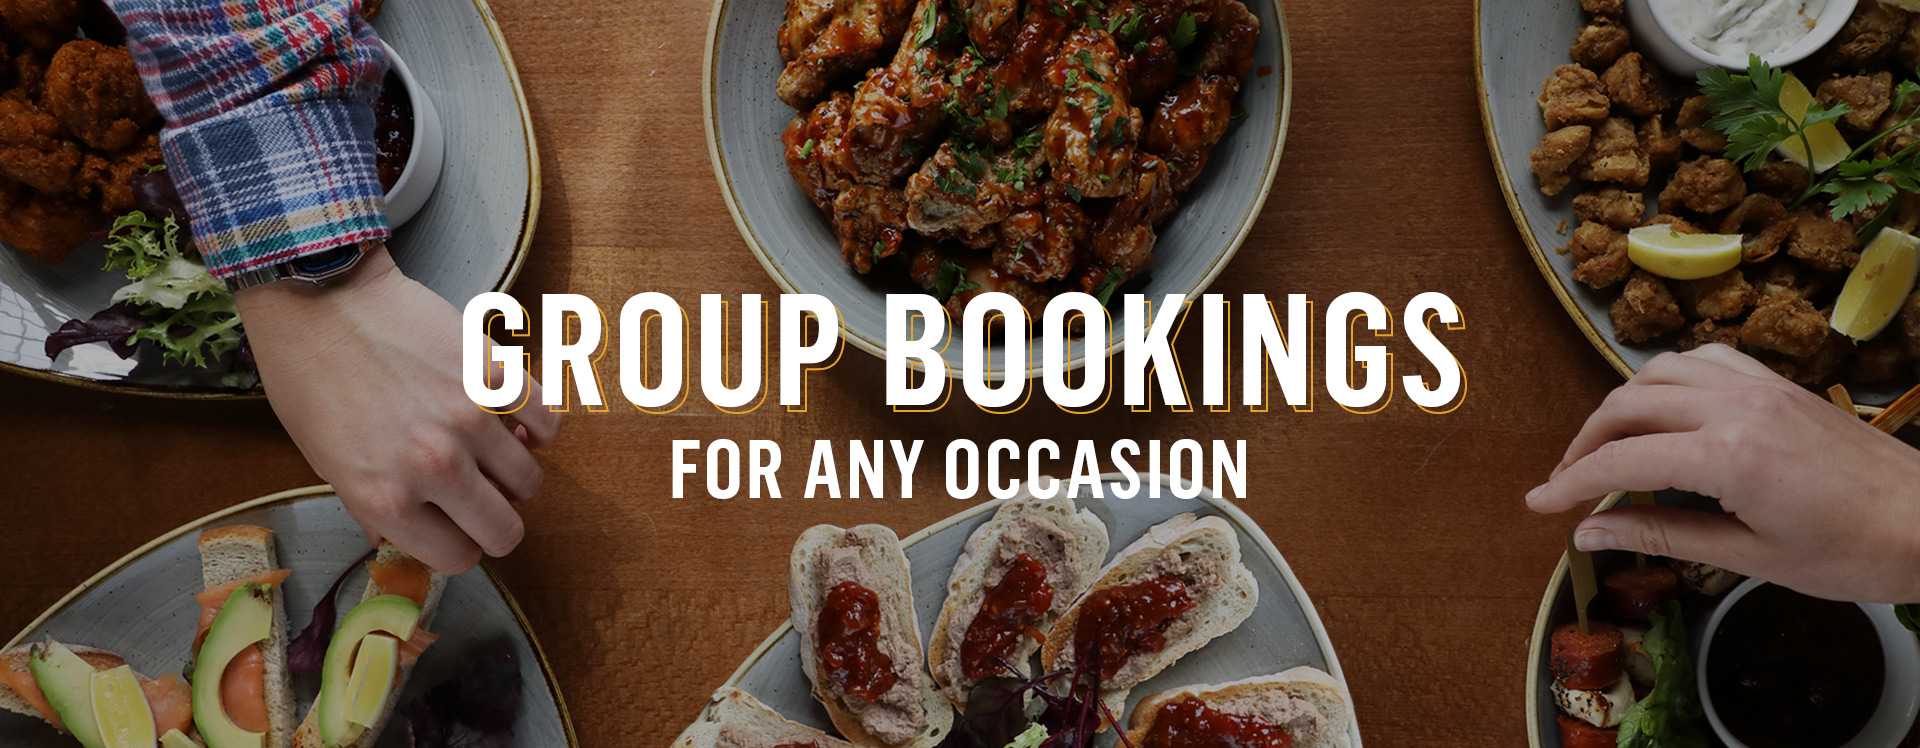 Group Bookings at The Elephant and Castle